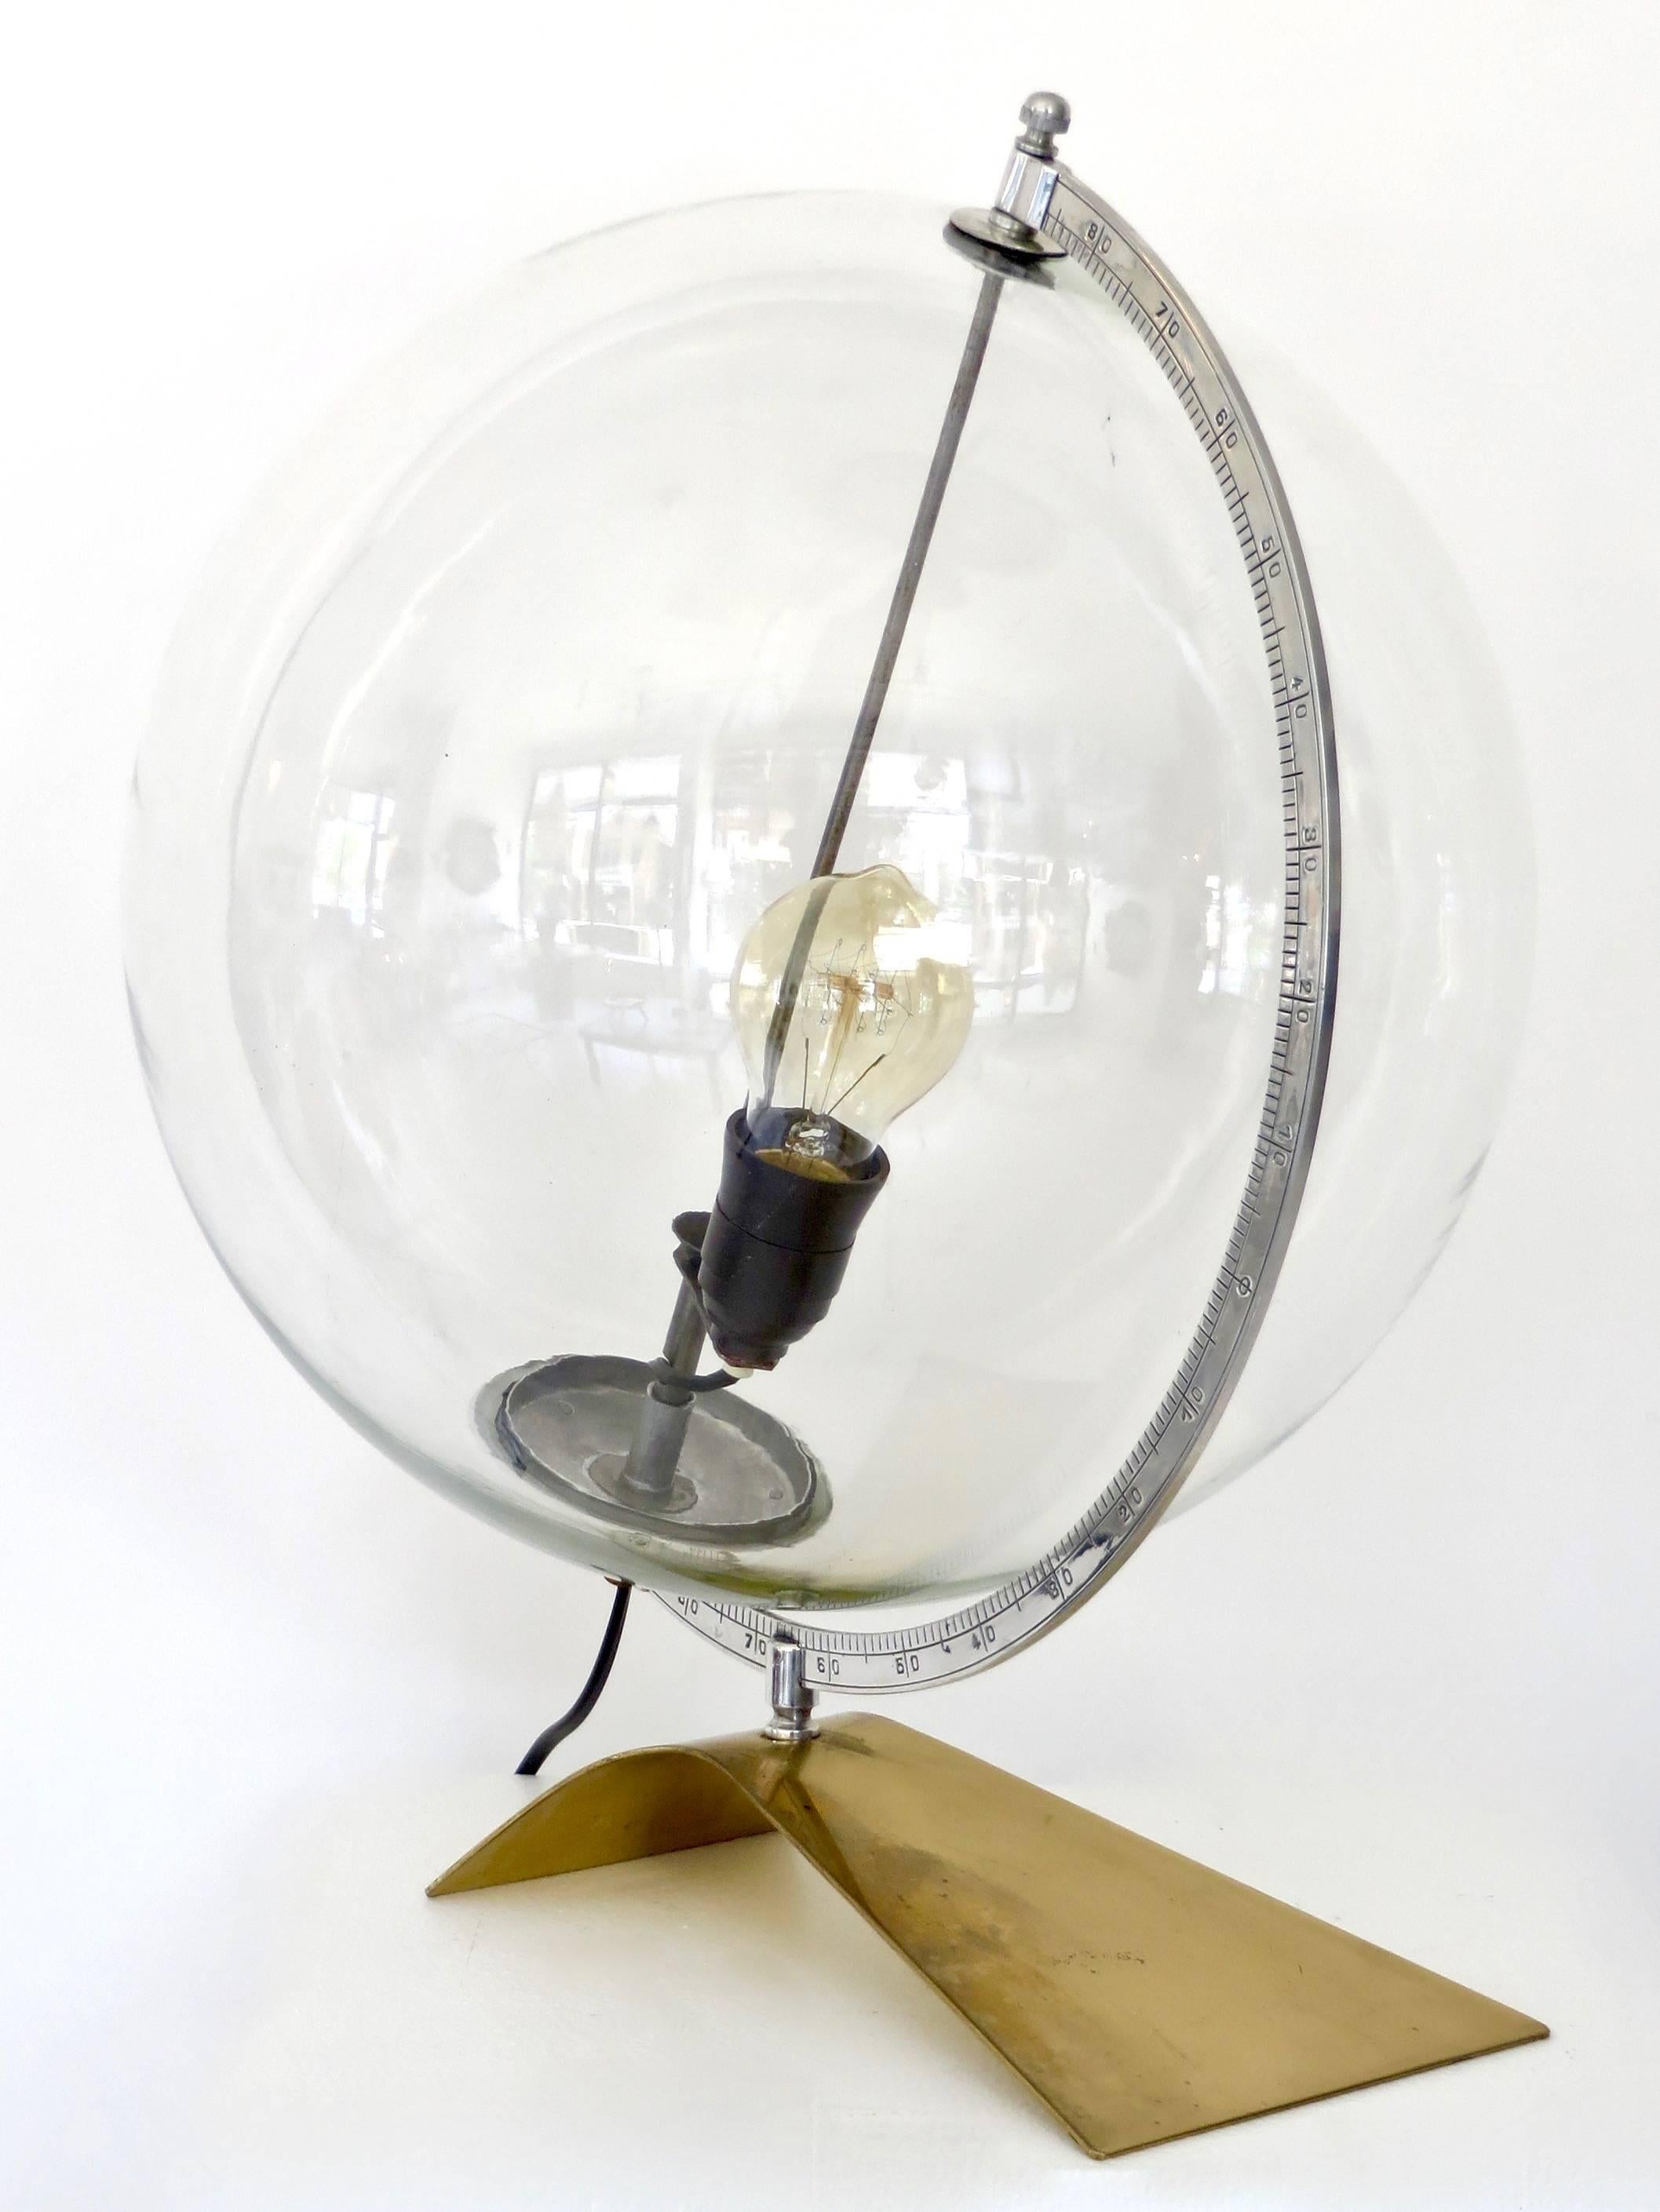 An Italian glass table lamp with brass base and steel armature forming a globe. The glass globe is mouth blown glass into a mold.
The steel armature has degree marks indicating decorative use as a globe
Overall size: 16" x12" x